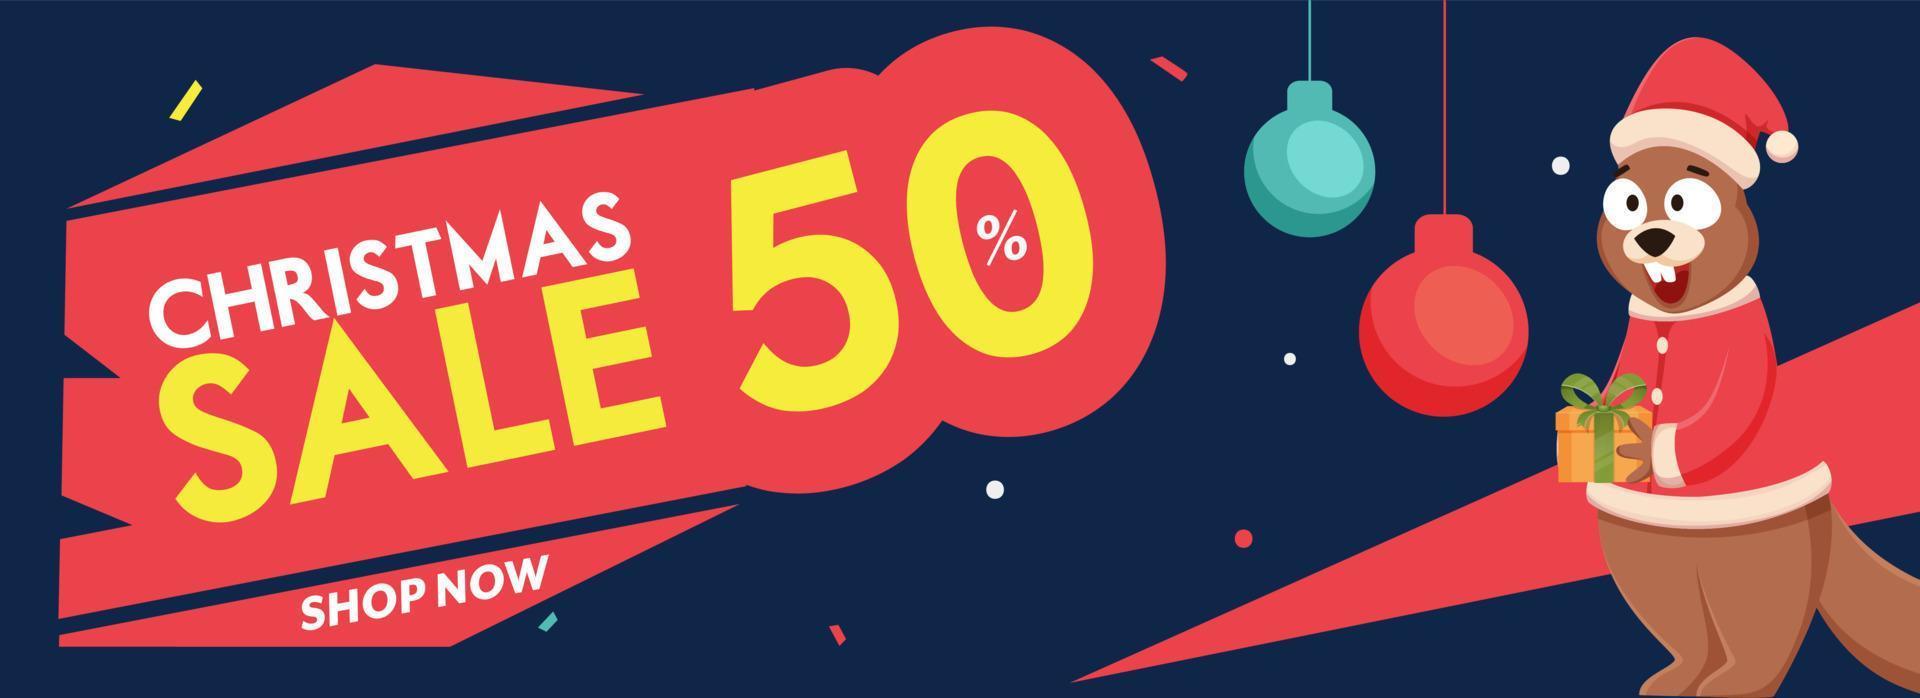 Christmas Sale Header or Banner Design with Discount Offer, Hanging Baubles and Cartoon Squirrel Holding Gift Box on Blue Background. vector